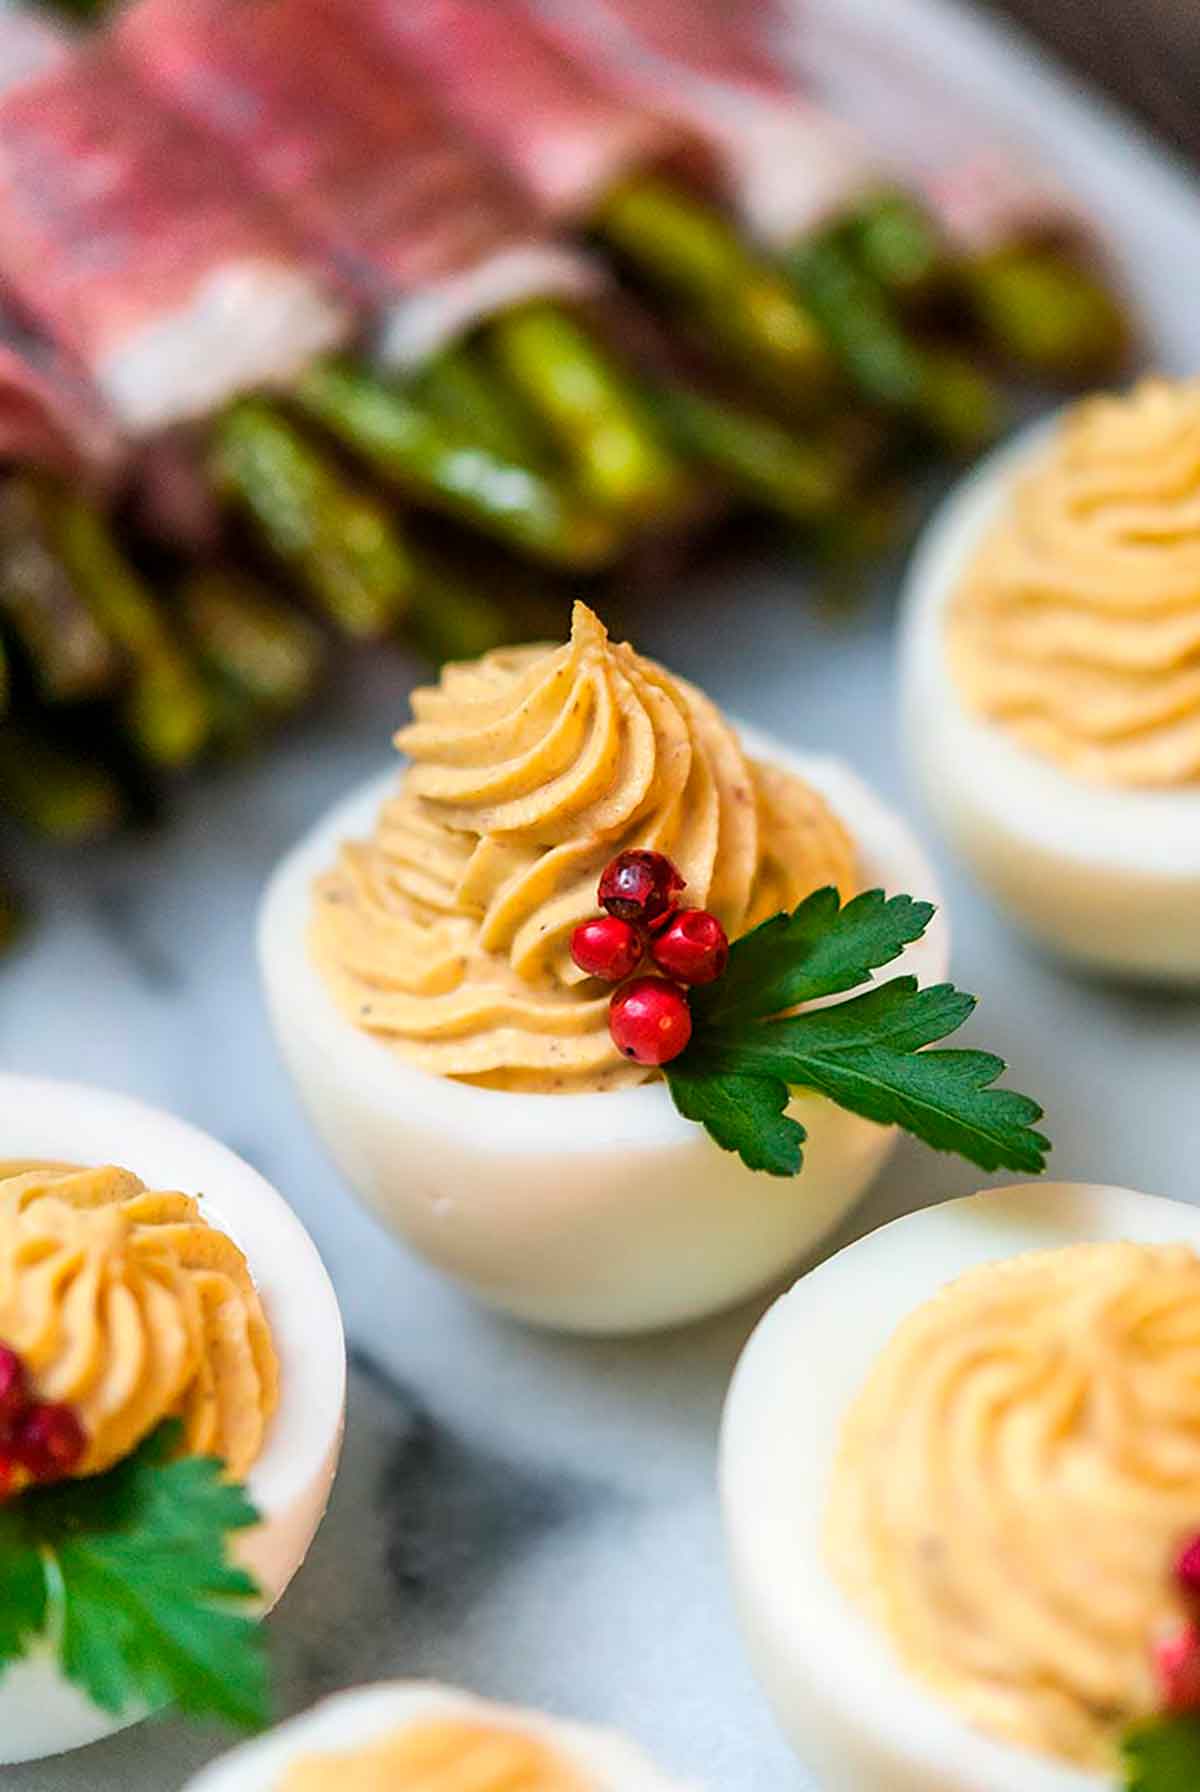 A deviled egg garnished with pink peppercorns and parsley, surrounded by other deviled eggs and asparagus.